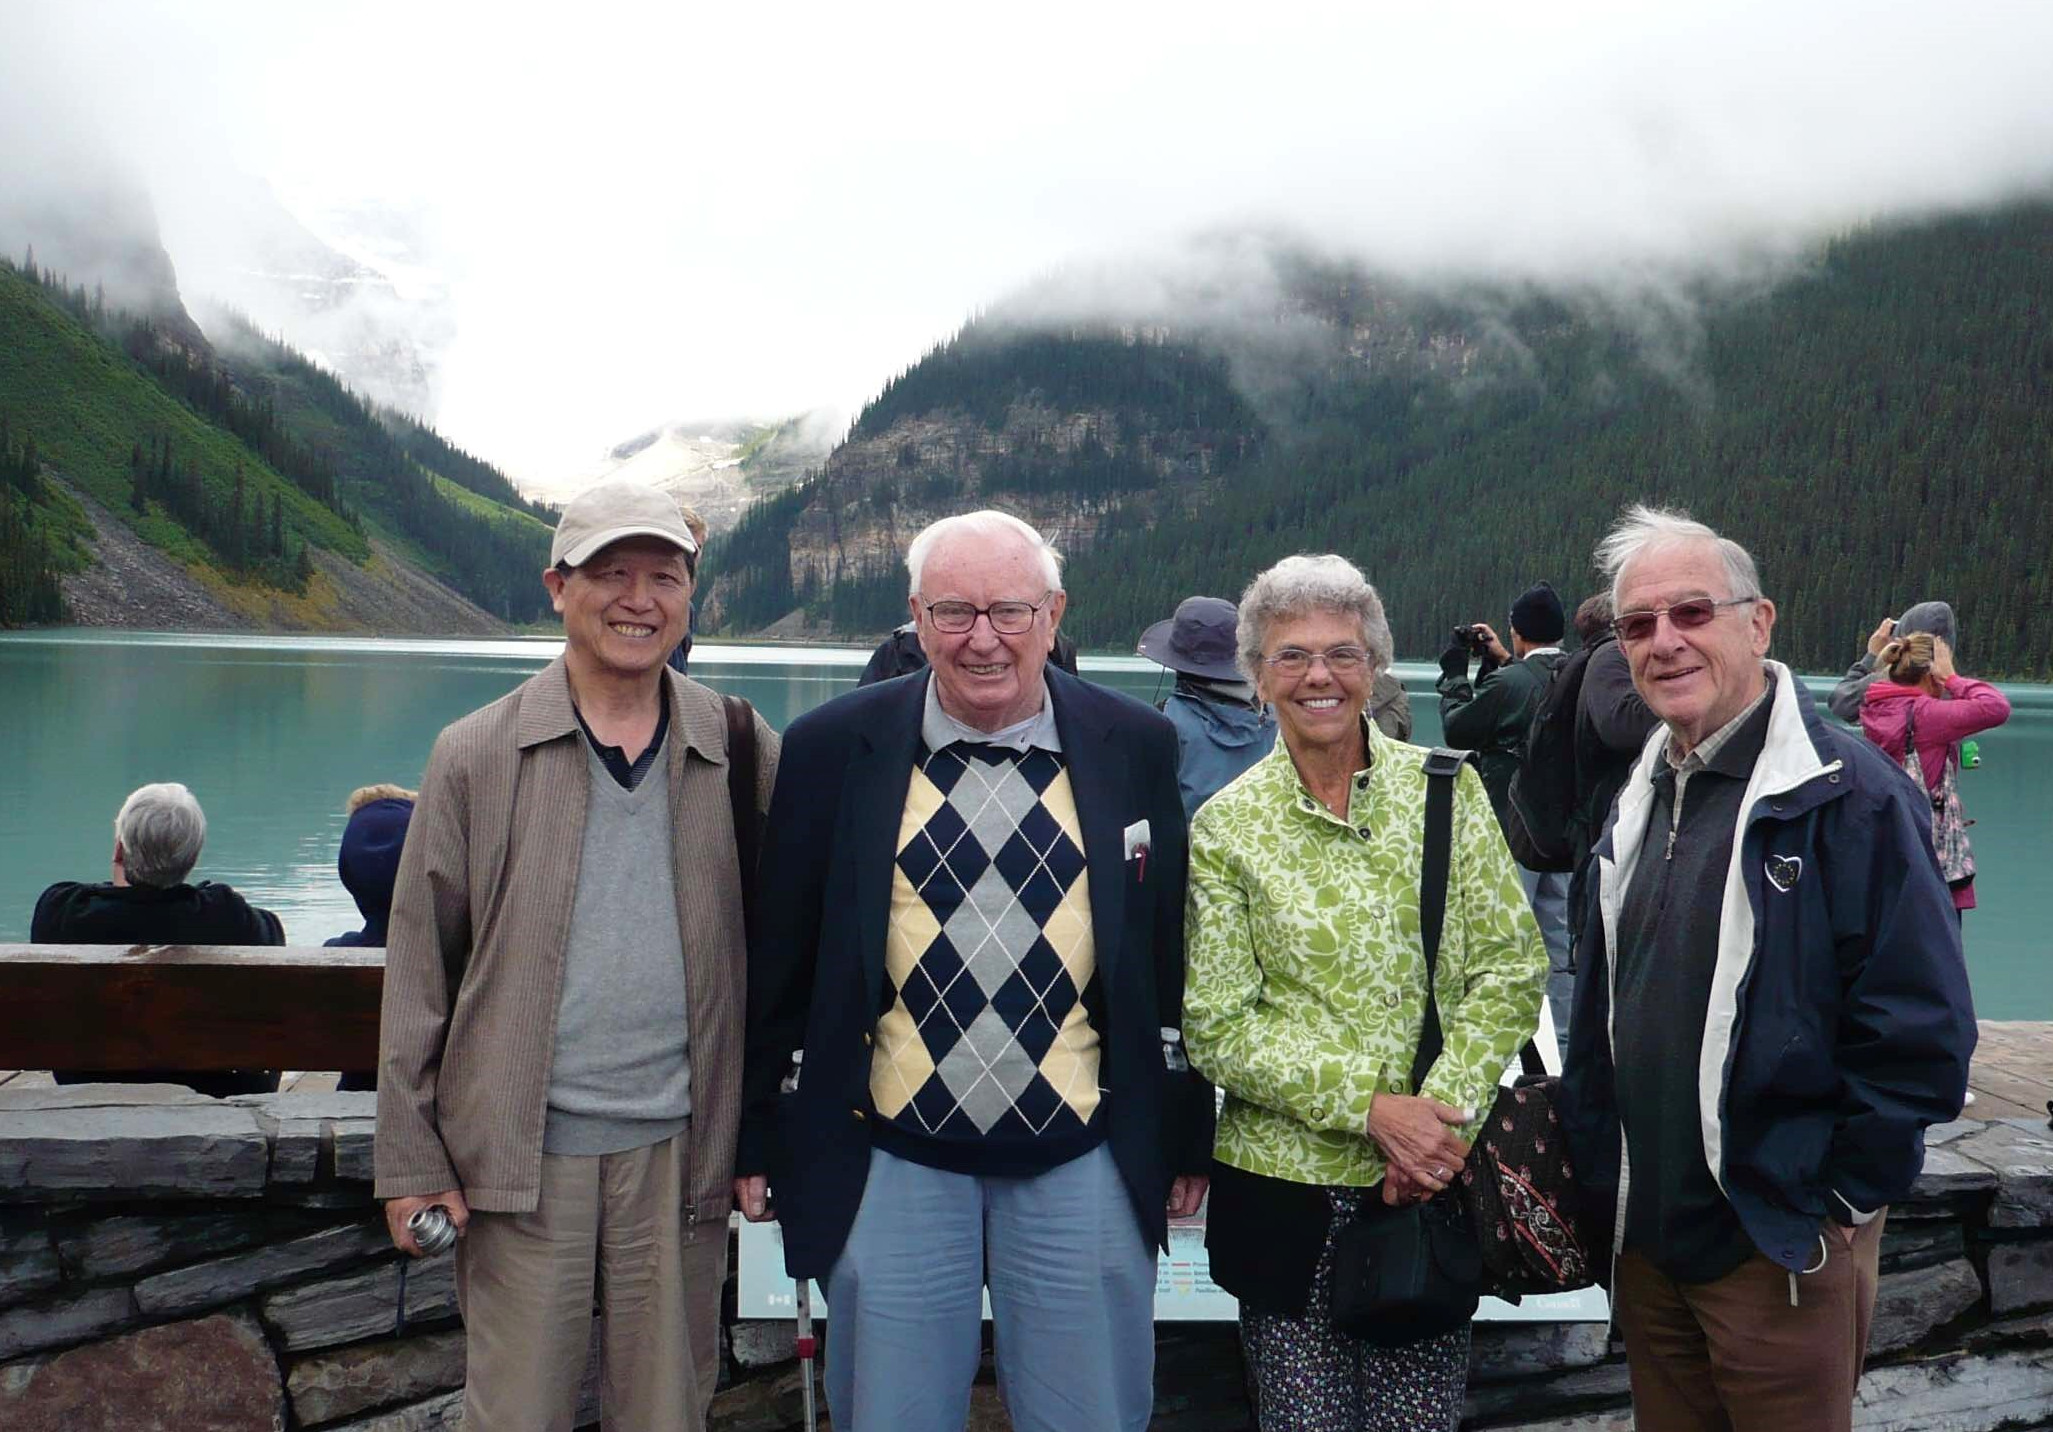 Norman E. Holden and his wife Gail in Banff (Canada) during the 2011 CIAAW meeting, along with CIAAW members Tiping Ding (left) and Paul De Bievre (right).